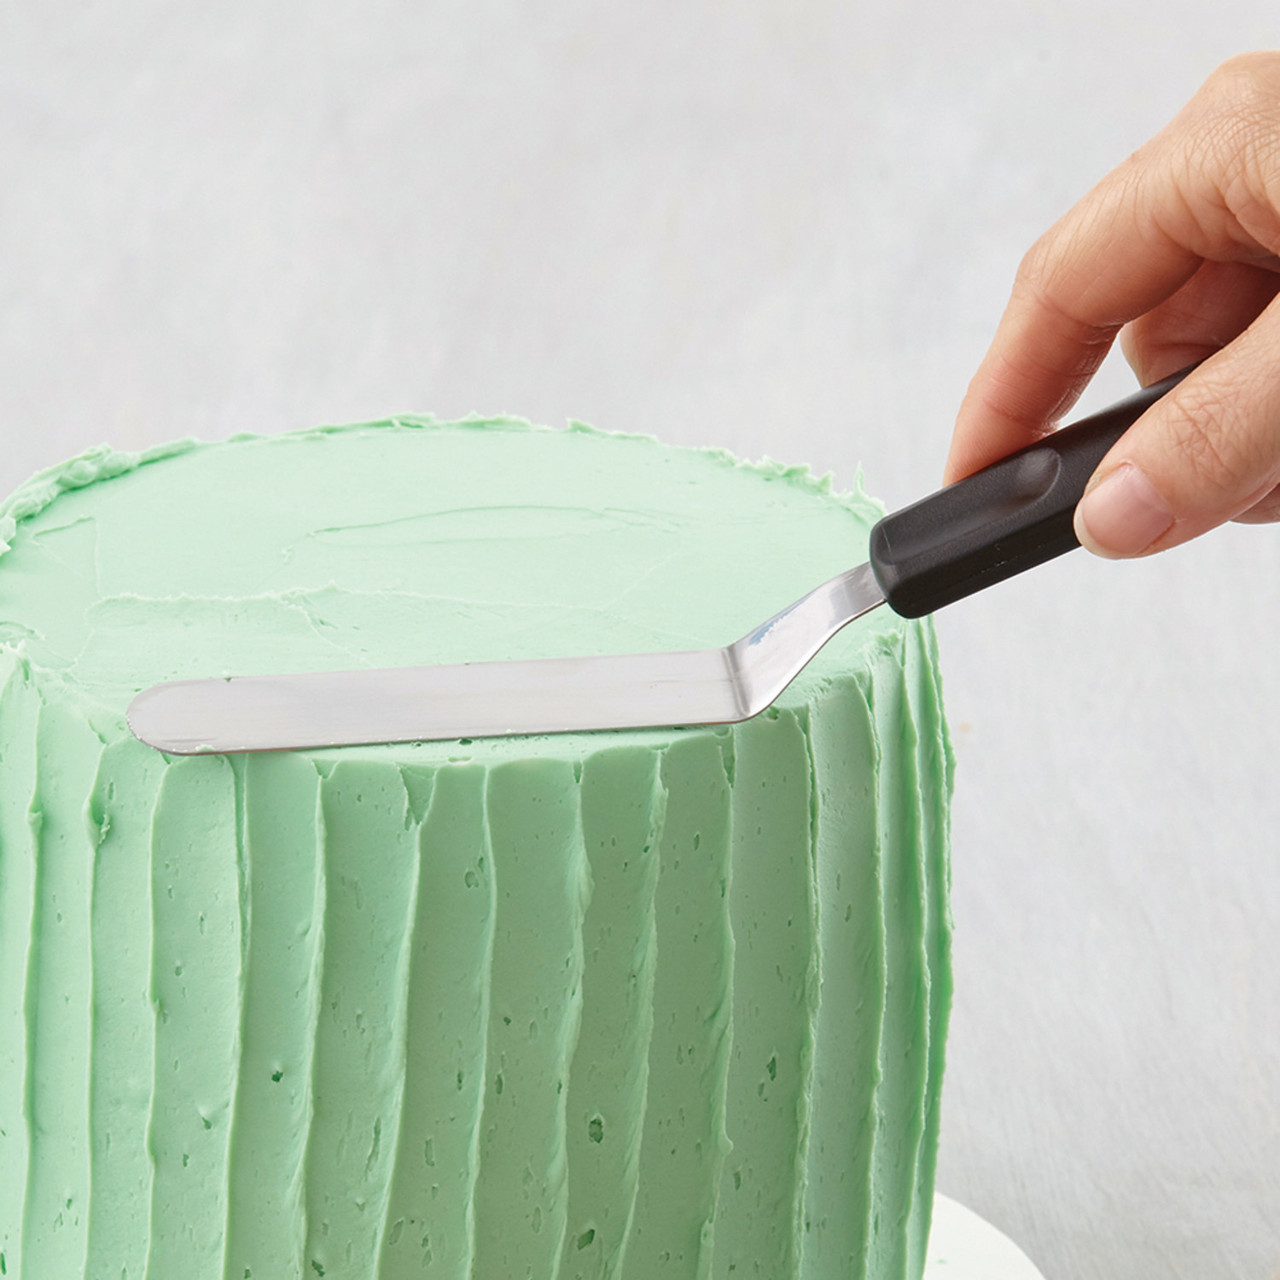 How to Decorate a Cake with a Spatula - Wilton